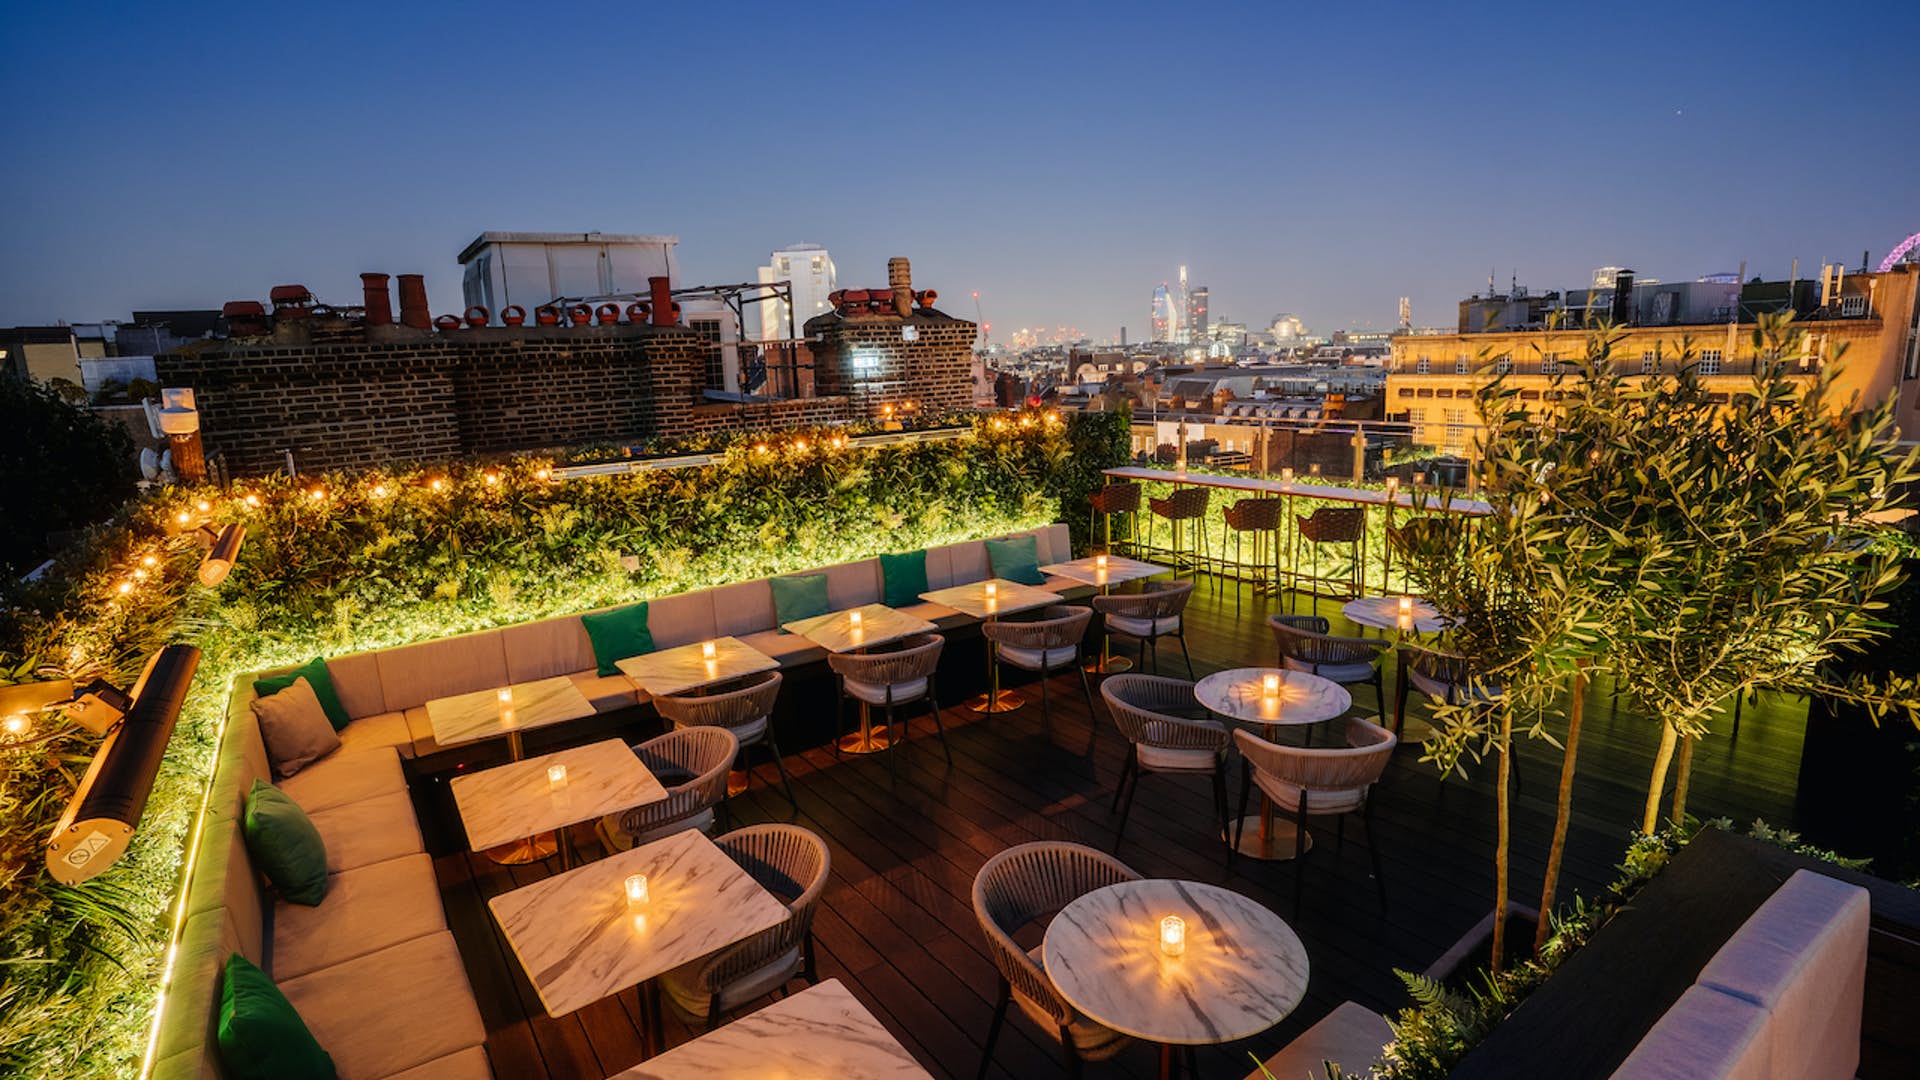 8 of The Best Bars to Soak Up The Summer Sun